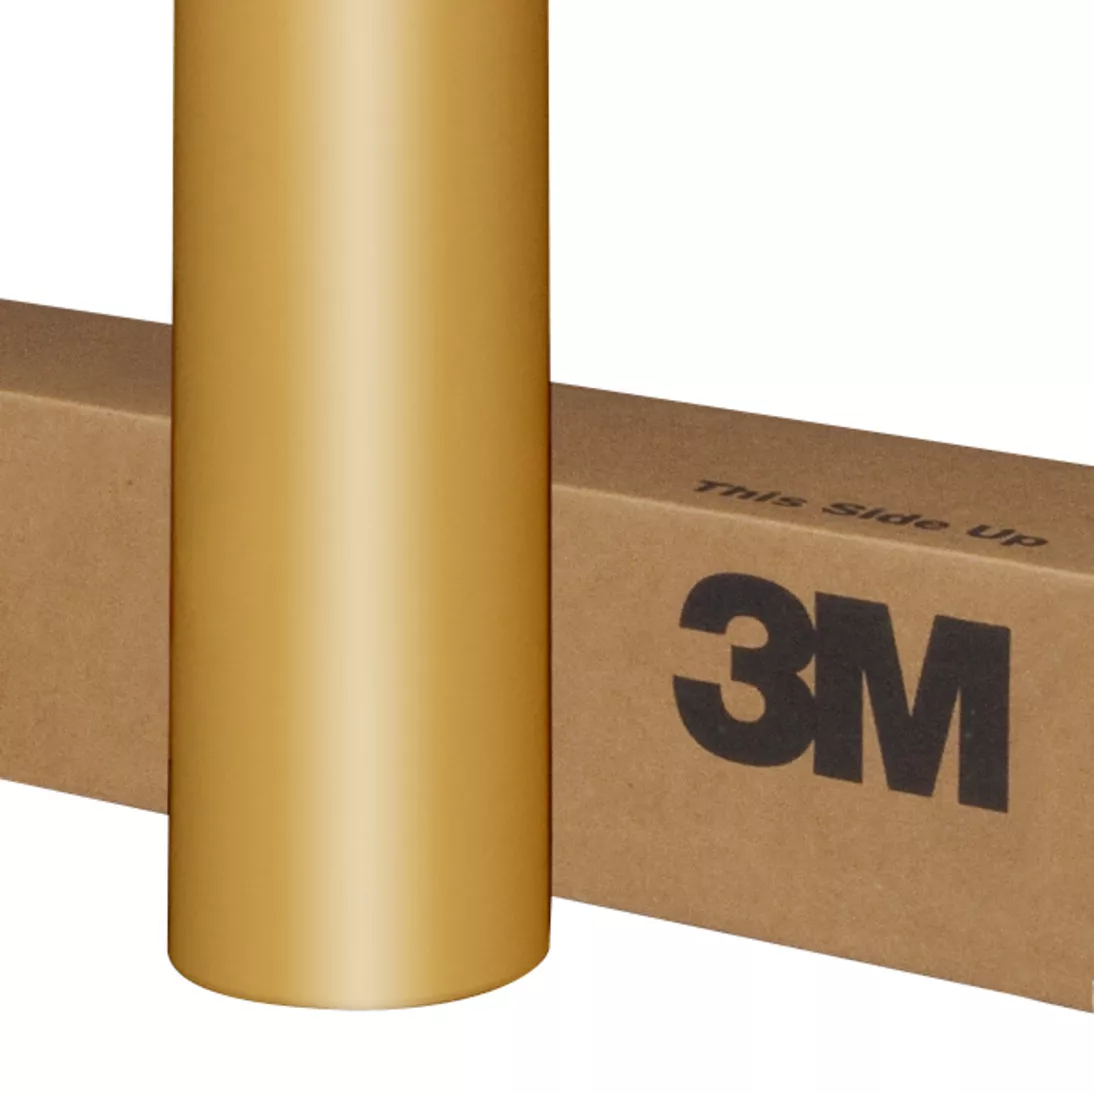 3M™ Scotchlite™ Reflective Graphic Film 5100R-64, Gold, 24 in x 50 yd, 1
Roll/Case